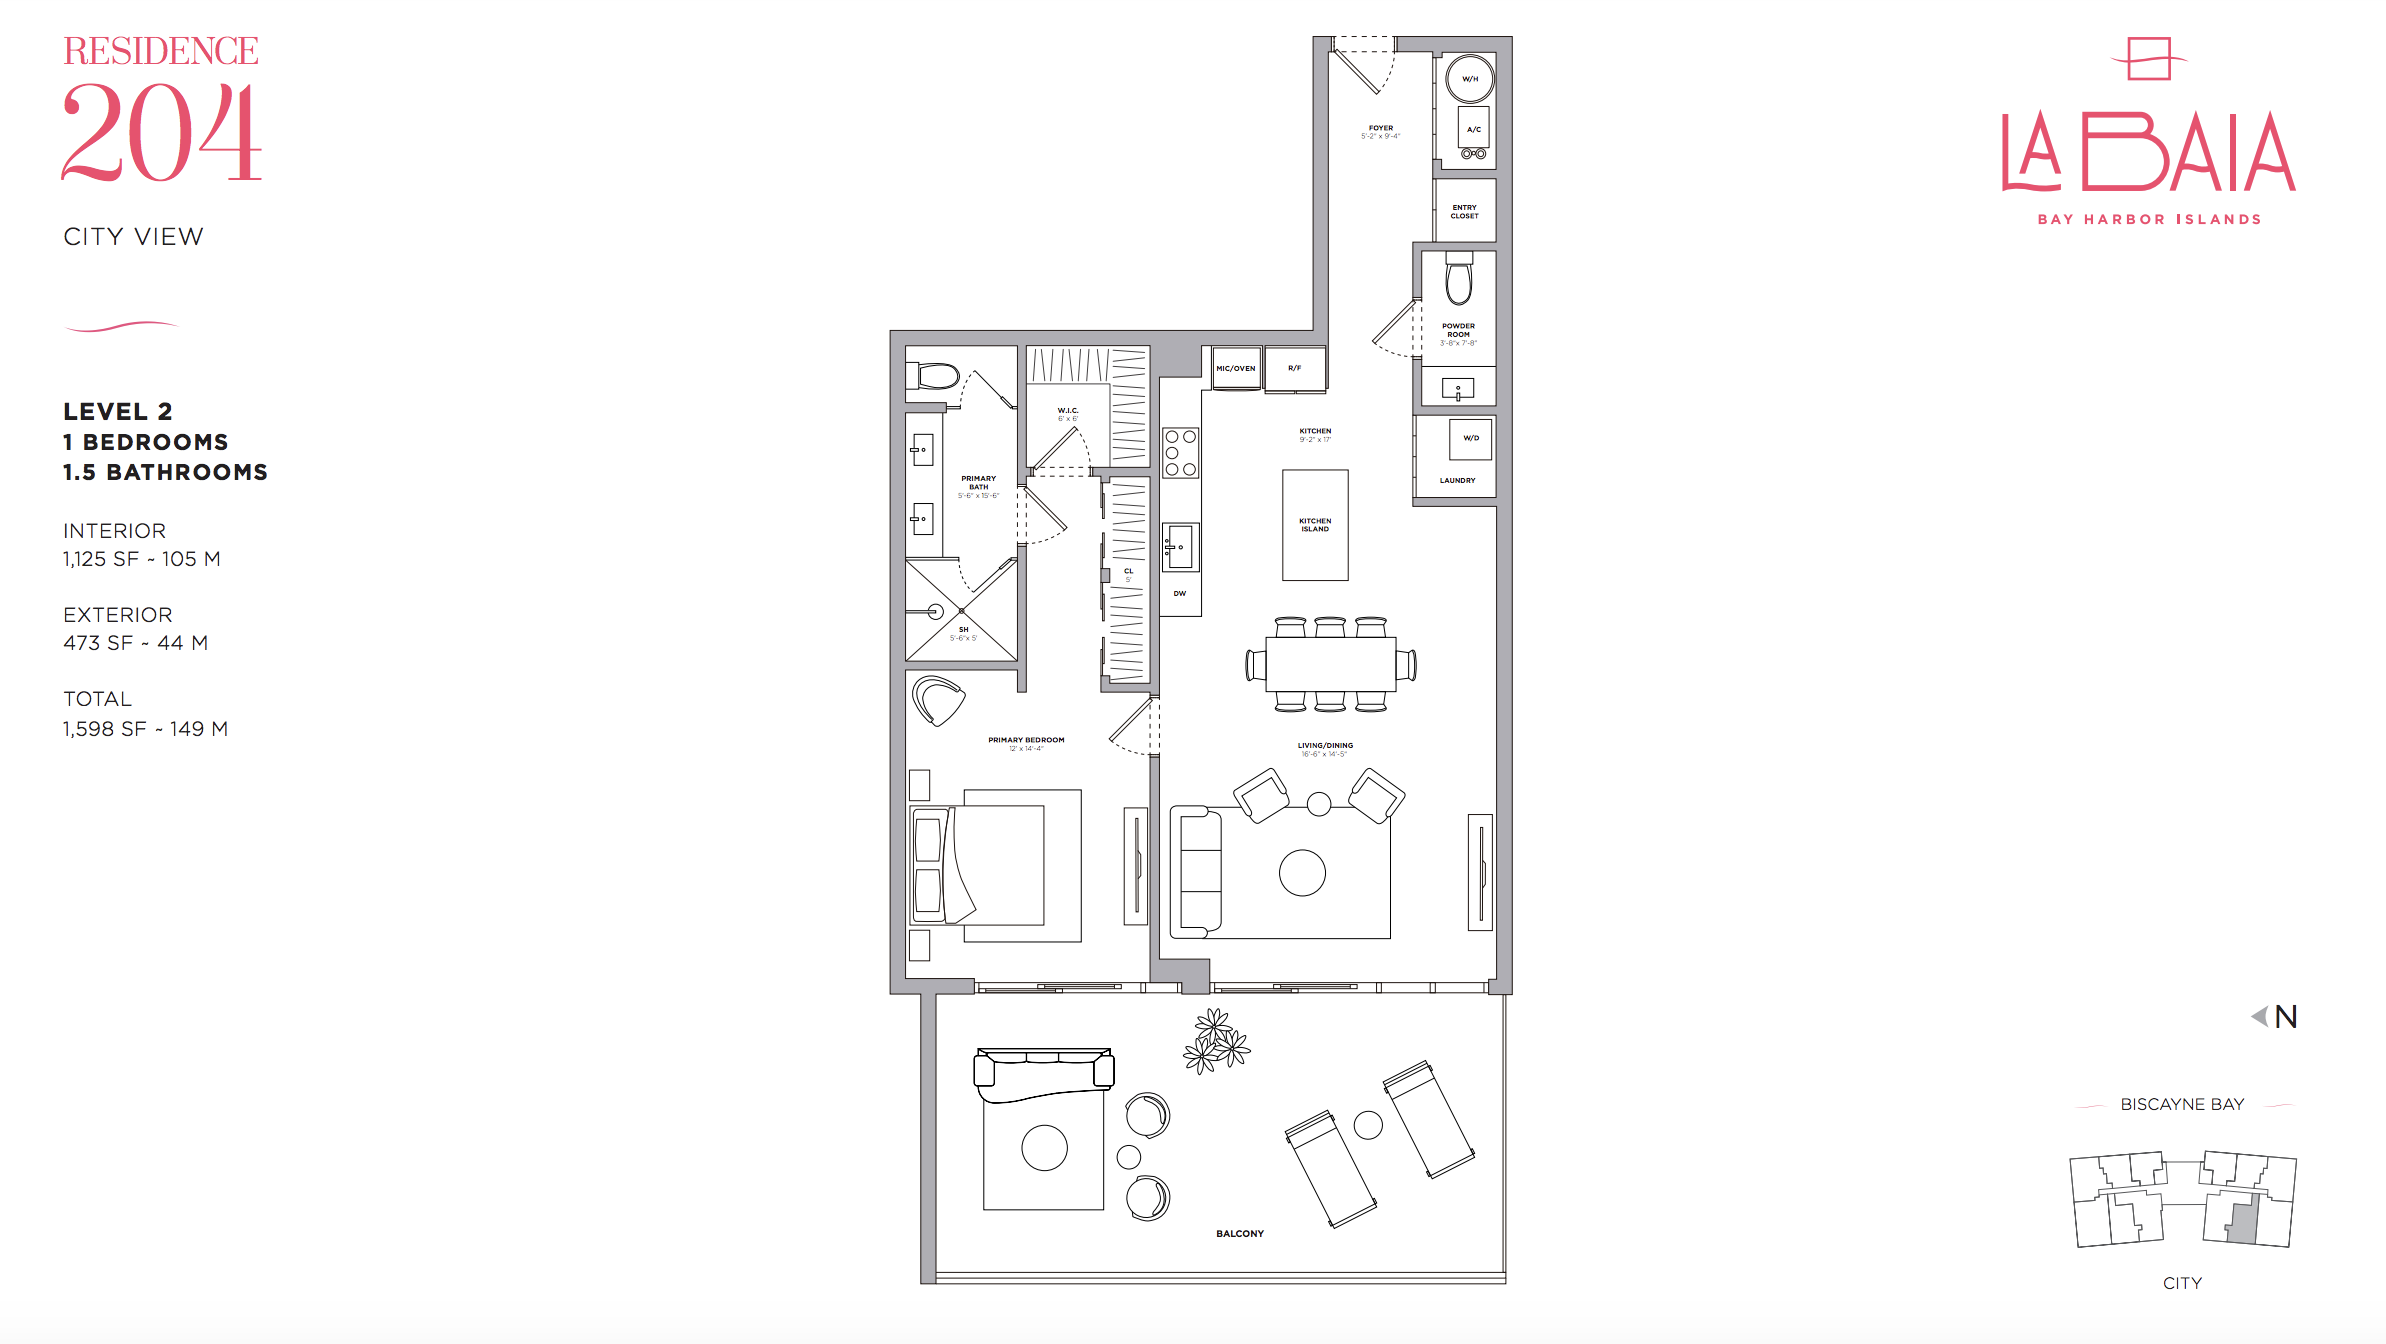 Floor Plan 204 | Level 2| 1 Be / 1.5 Ba | 1,125 SF | City View